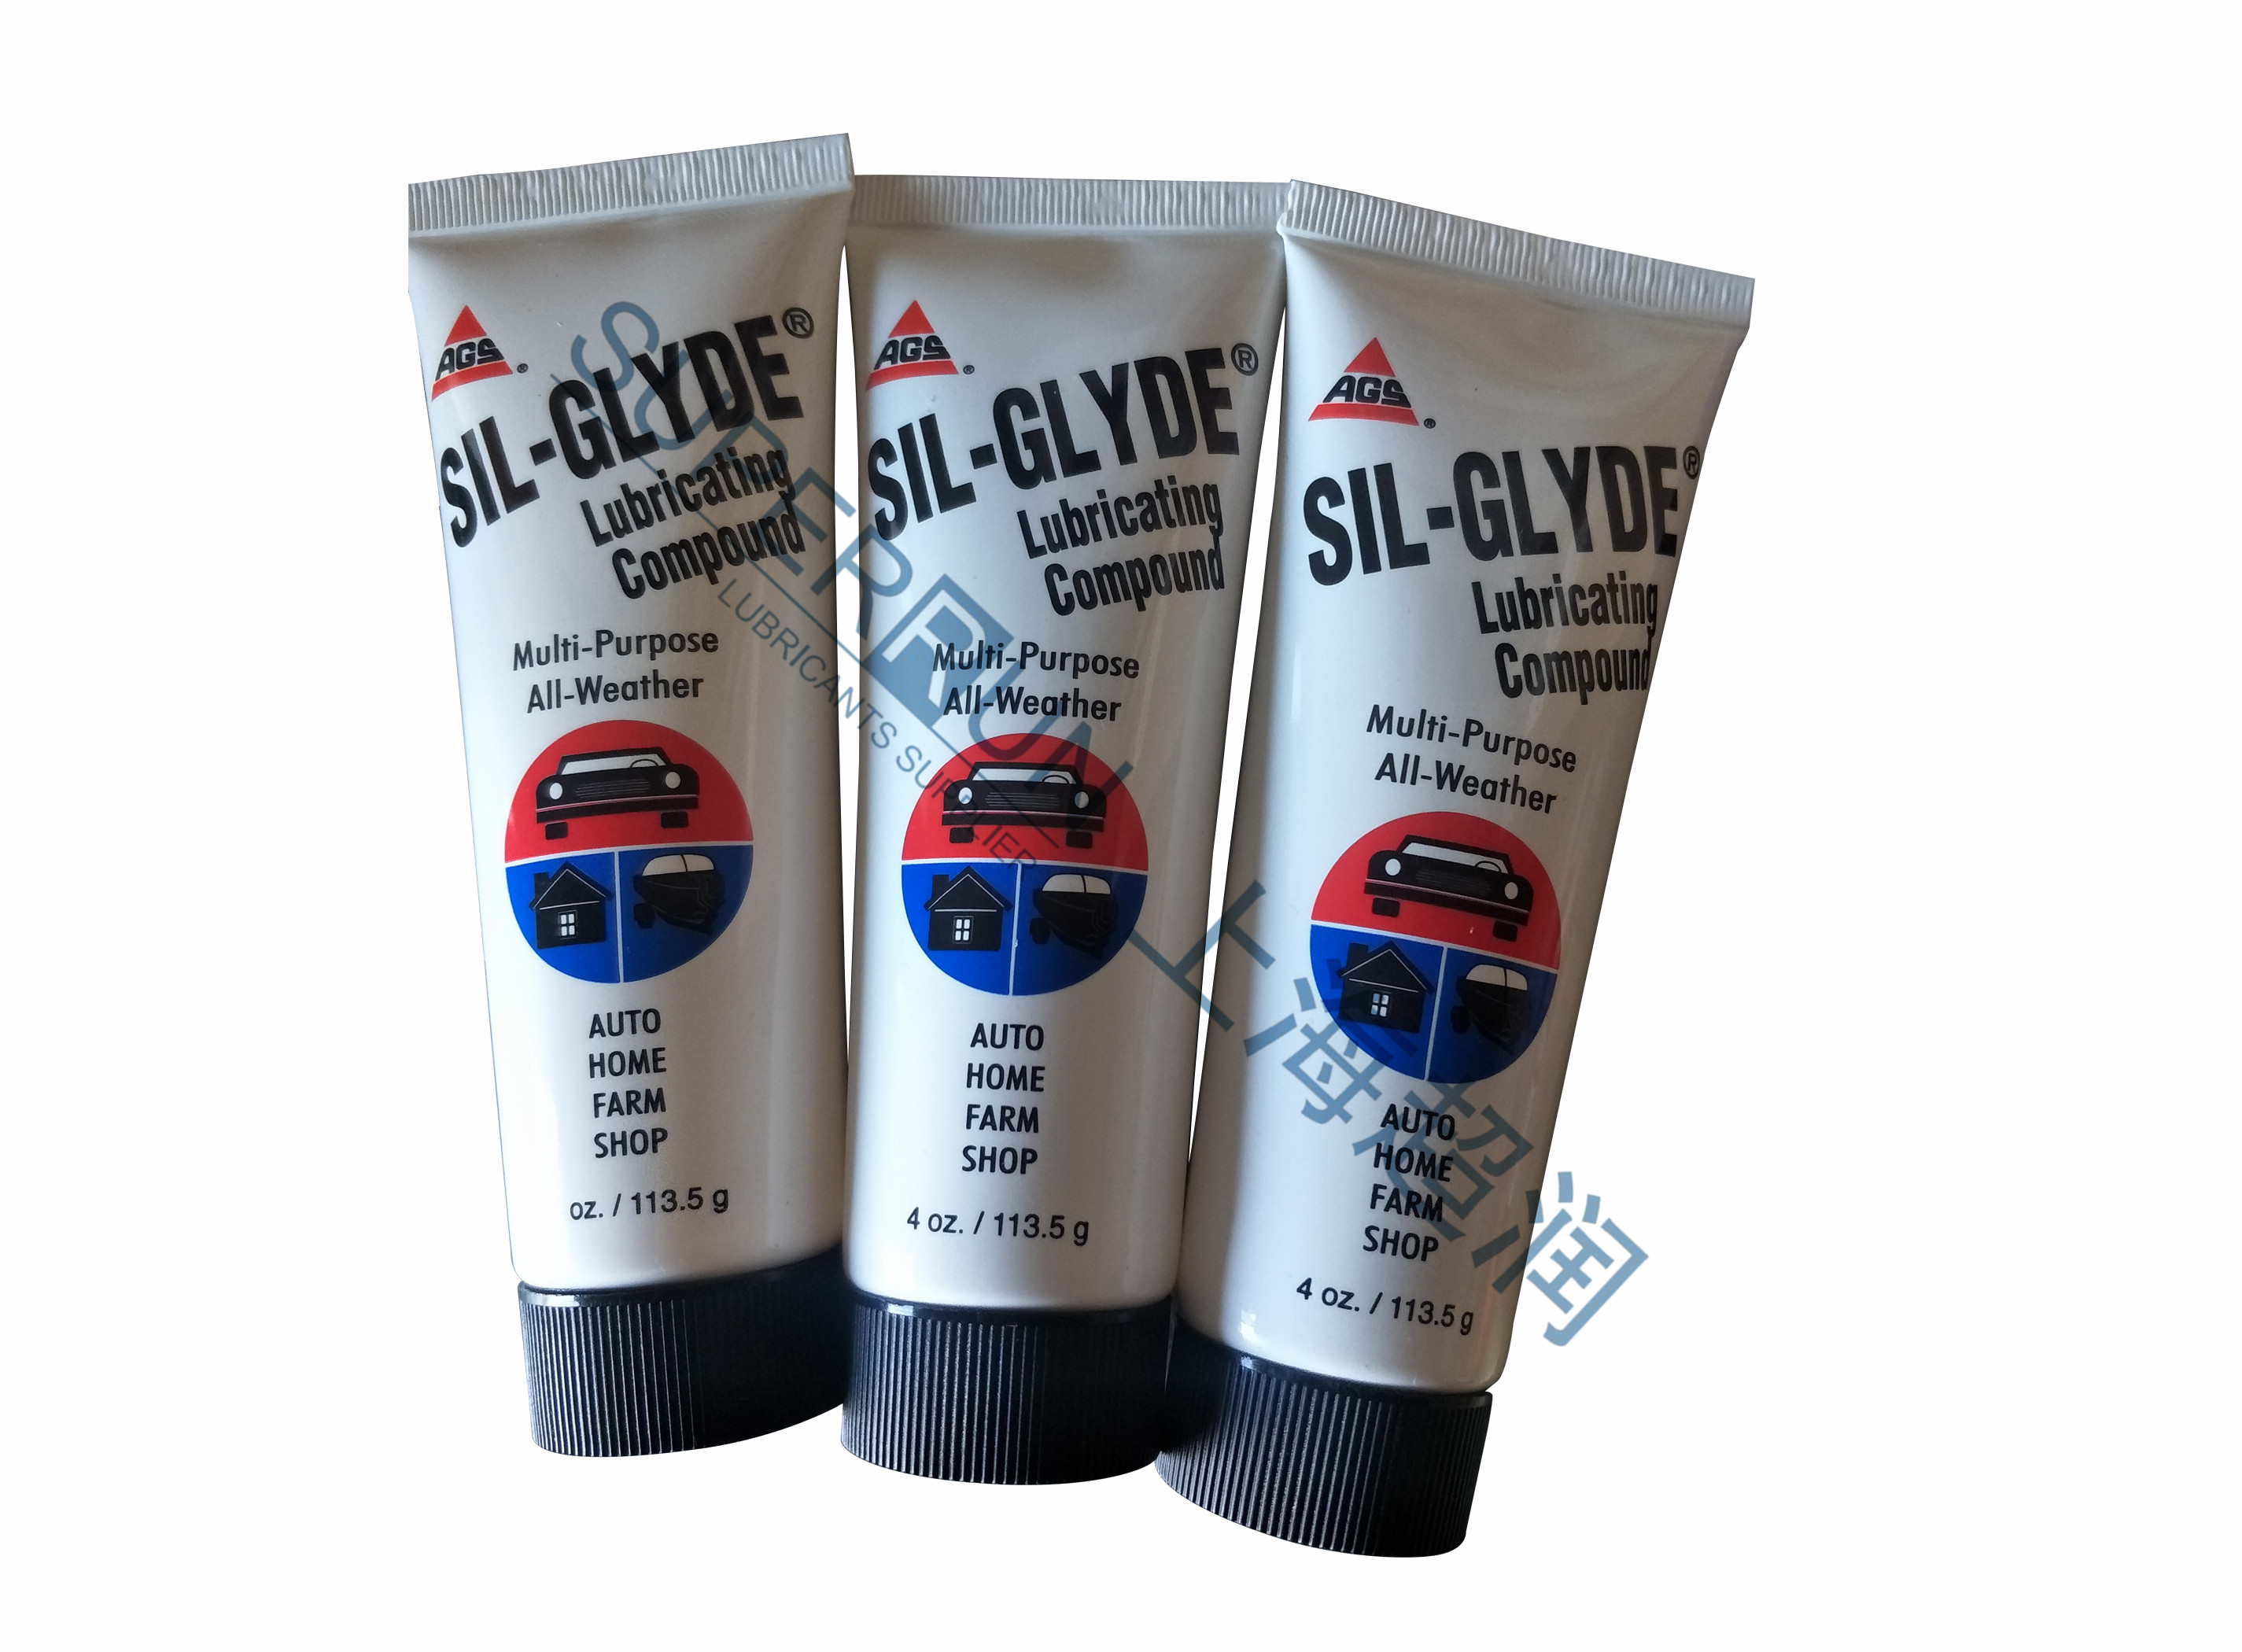 AGS Sil-Glyde Silicone Brake Lubricant